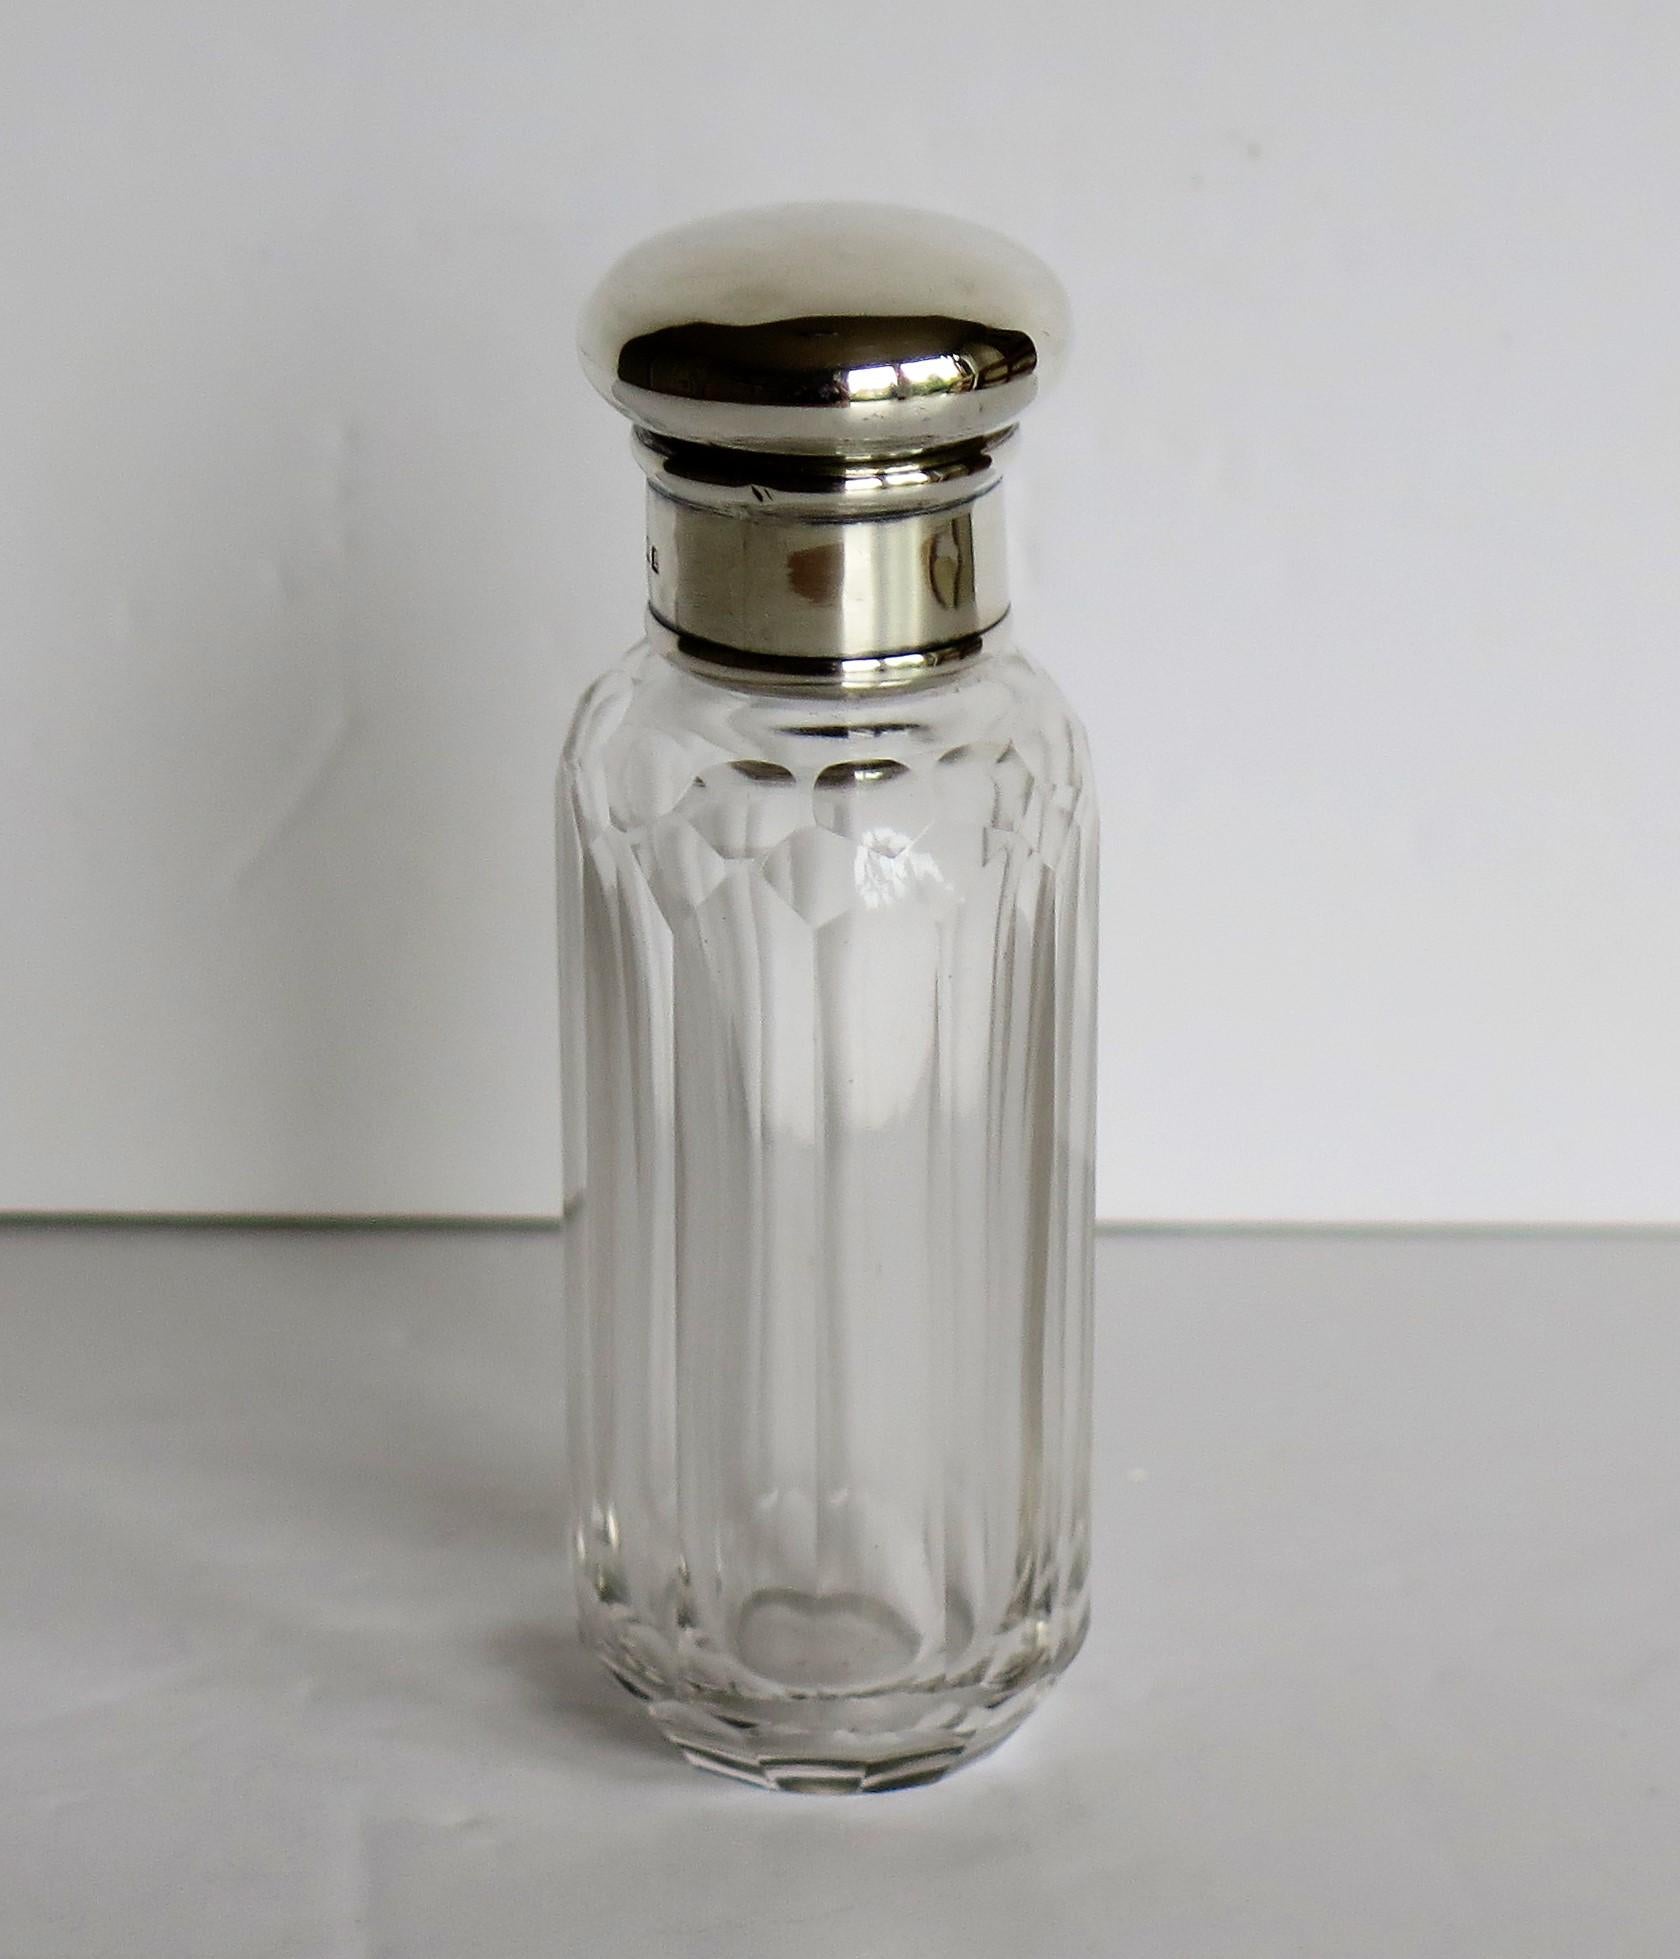 Art Deco Crystal Glass Cologne or Perfume Bottle with Sterling Silver Top, London, 1926